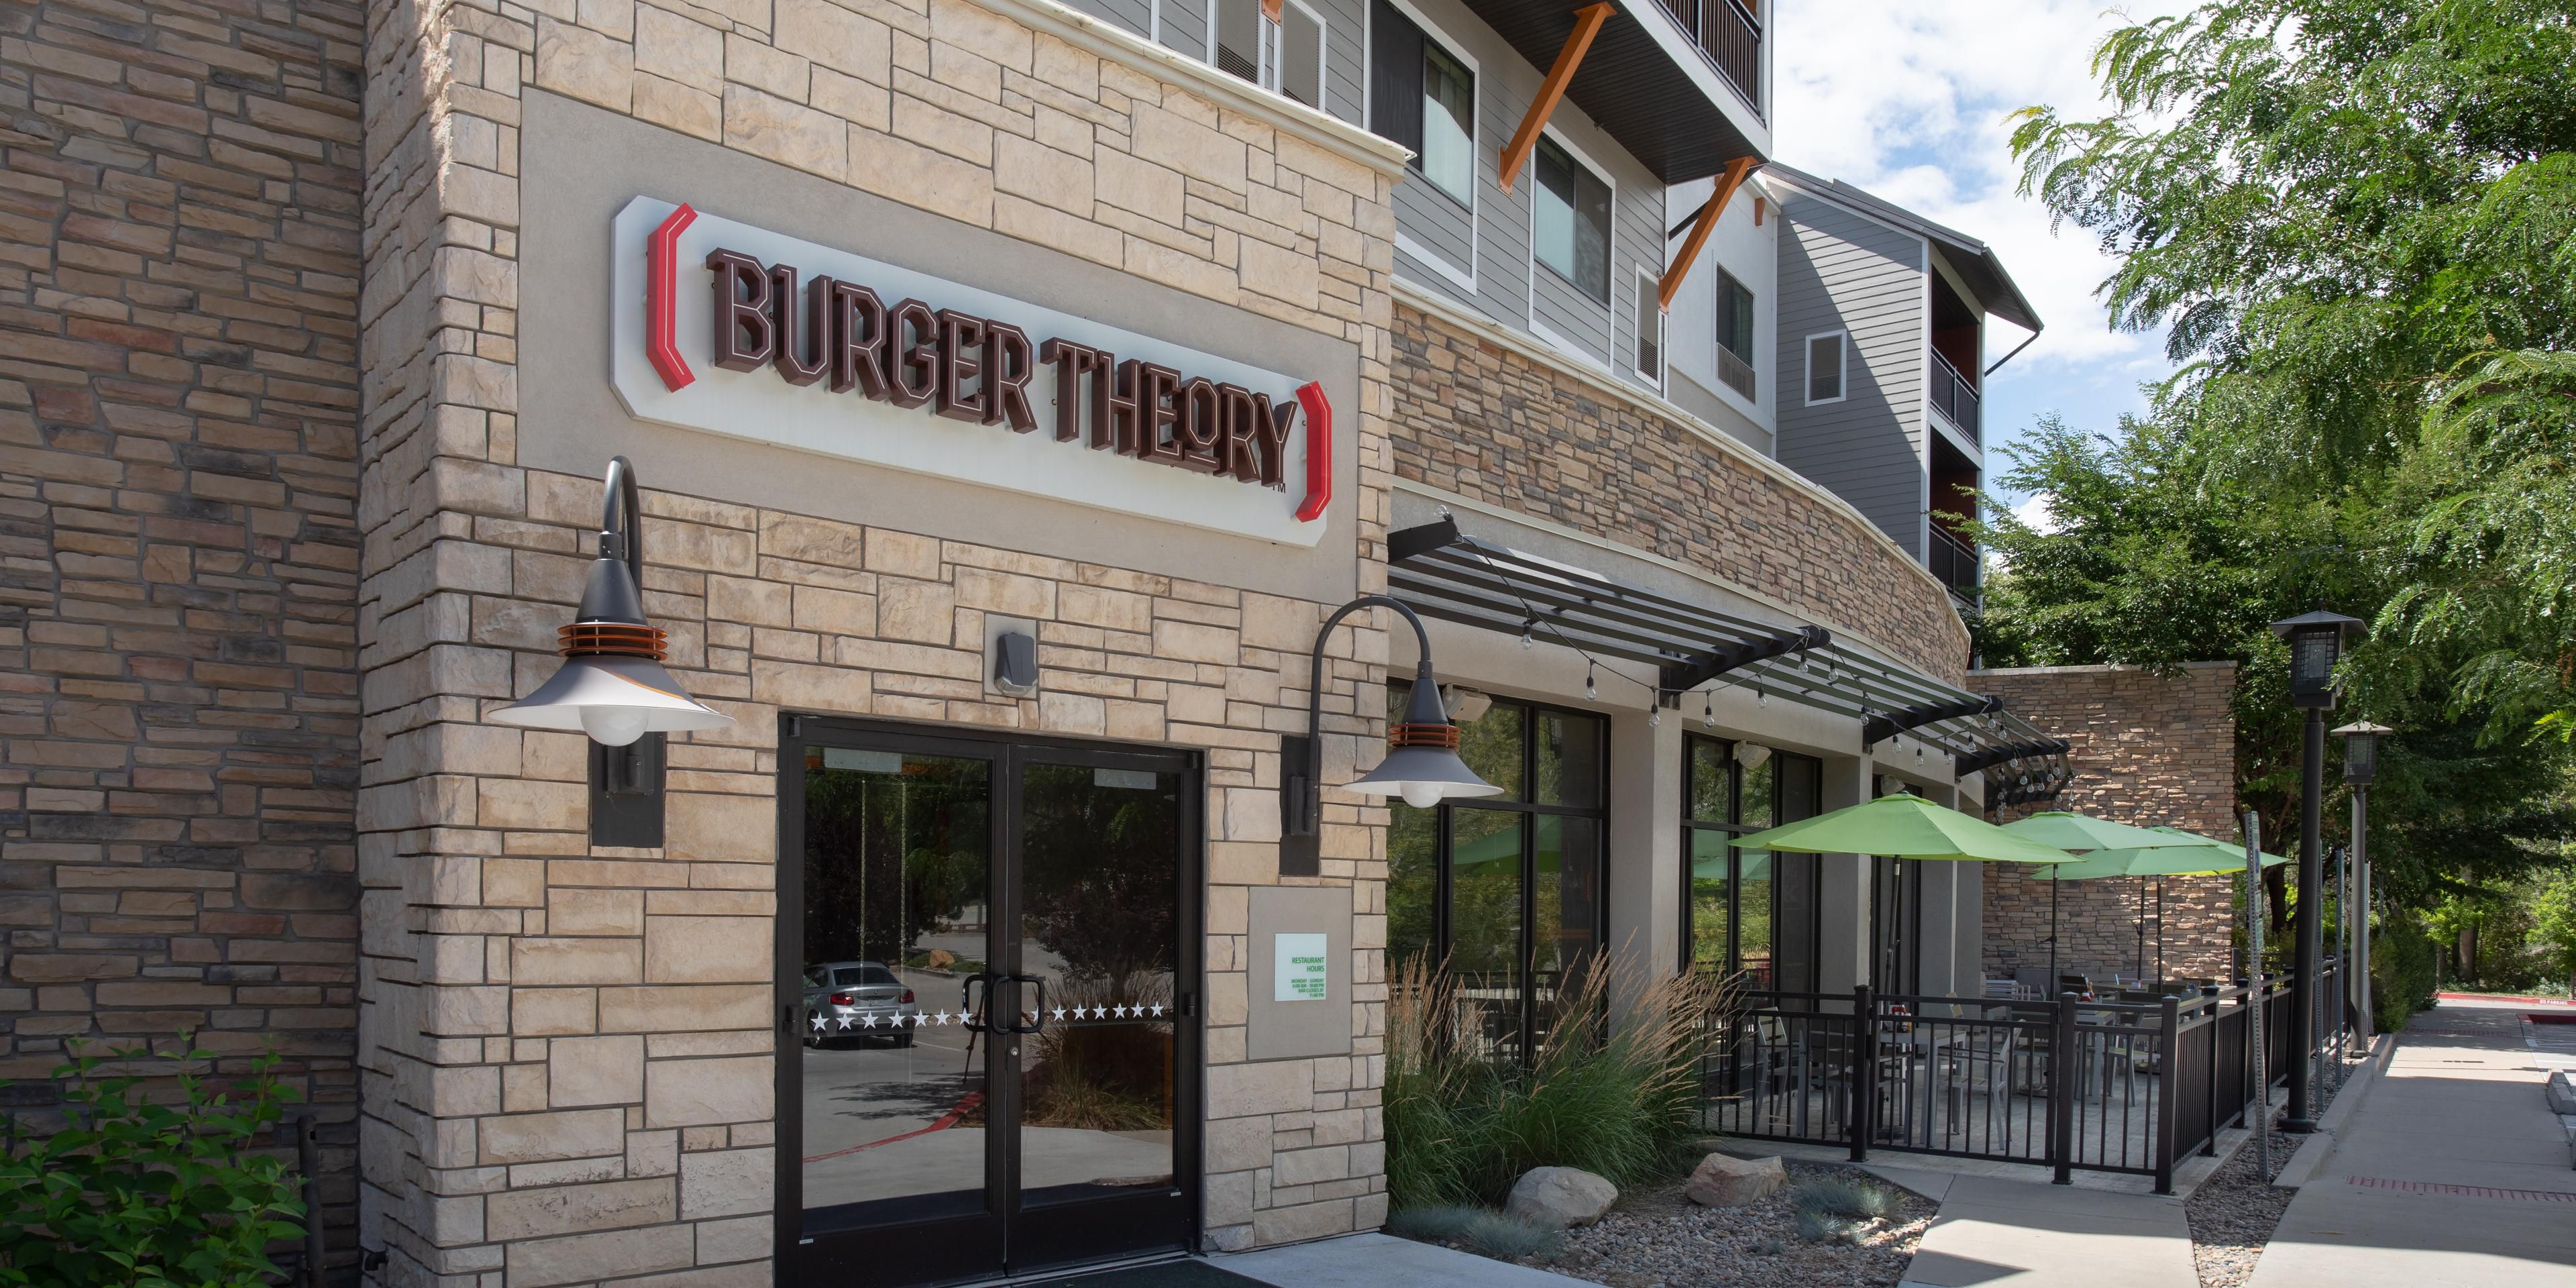 Burger Theory has an extensive menu and Colorado Craft Beers